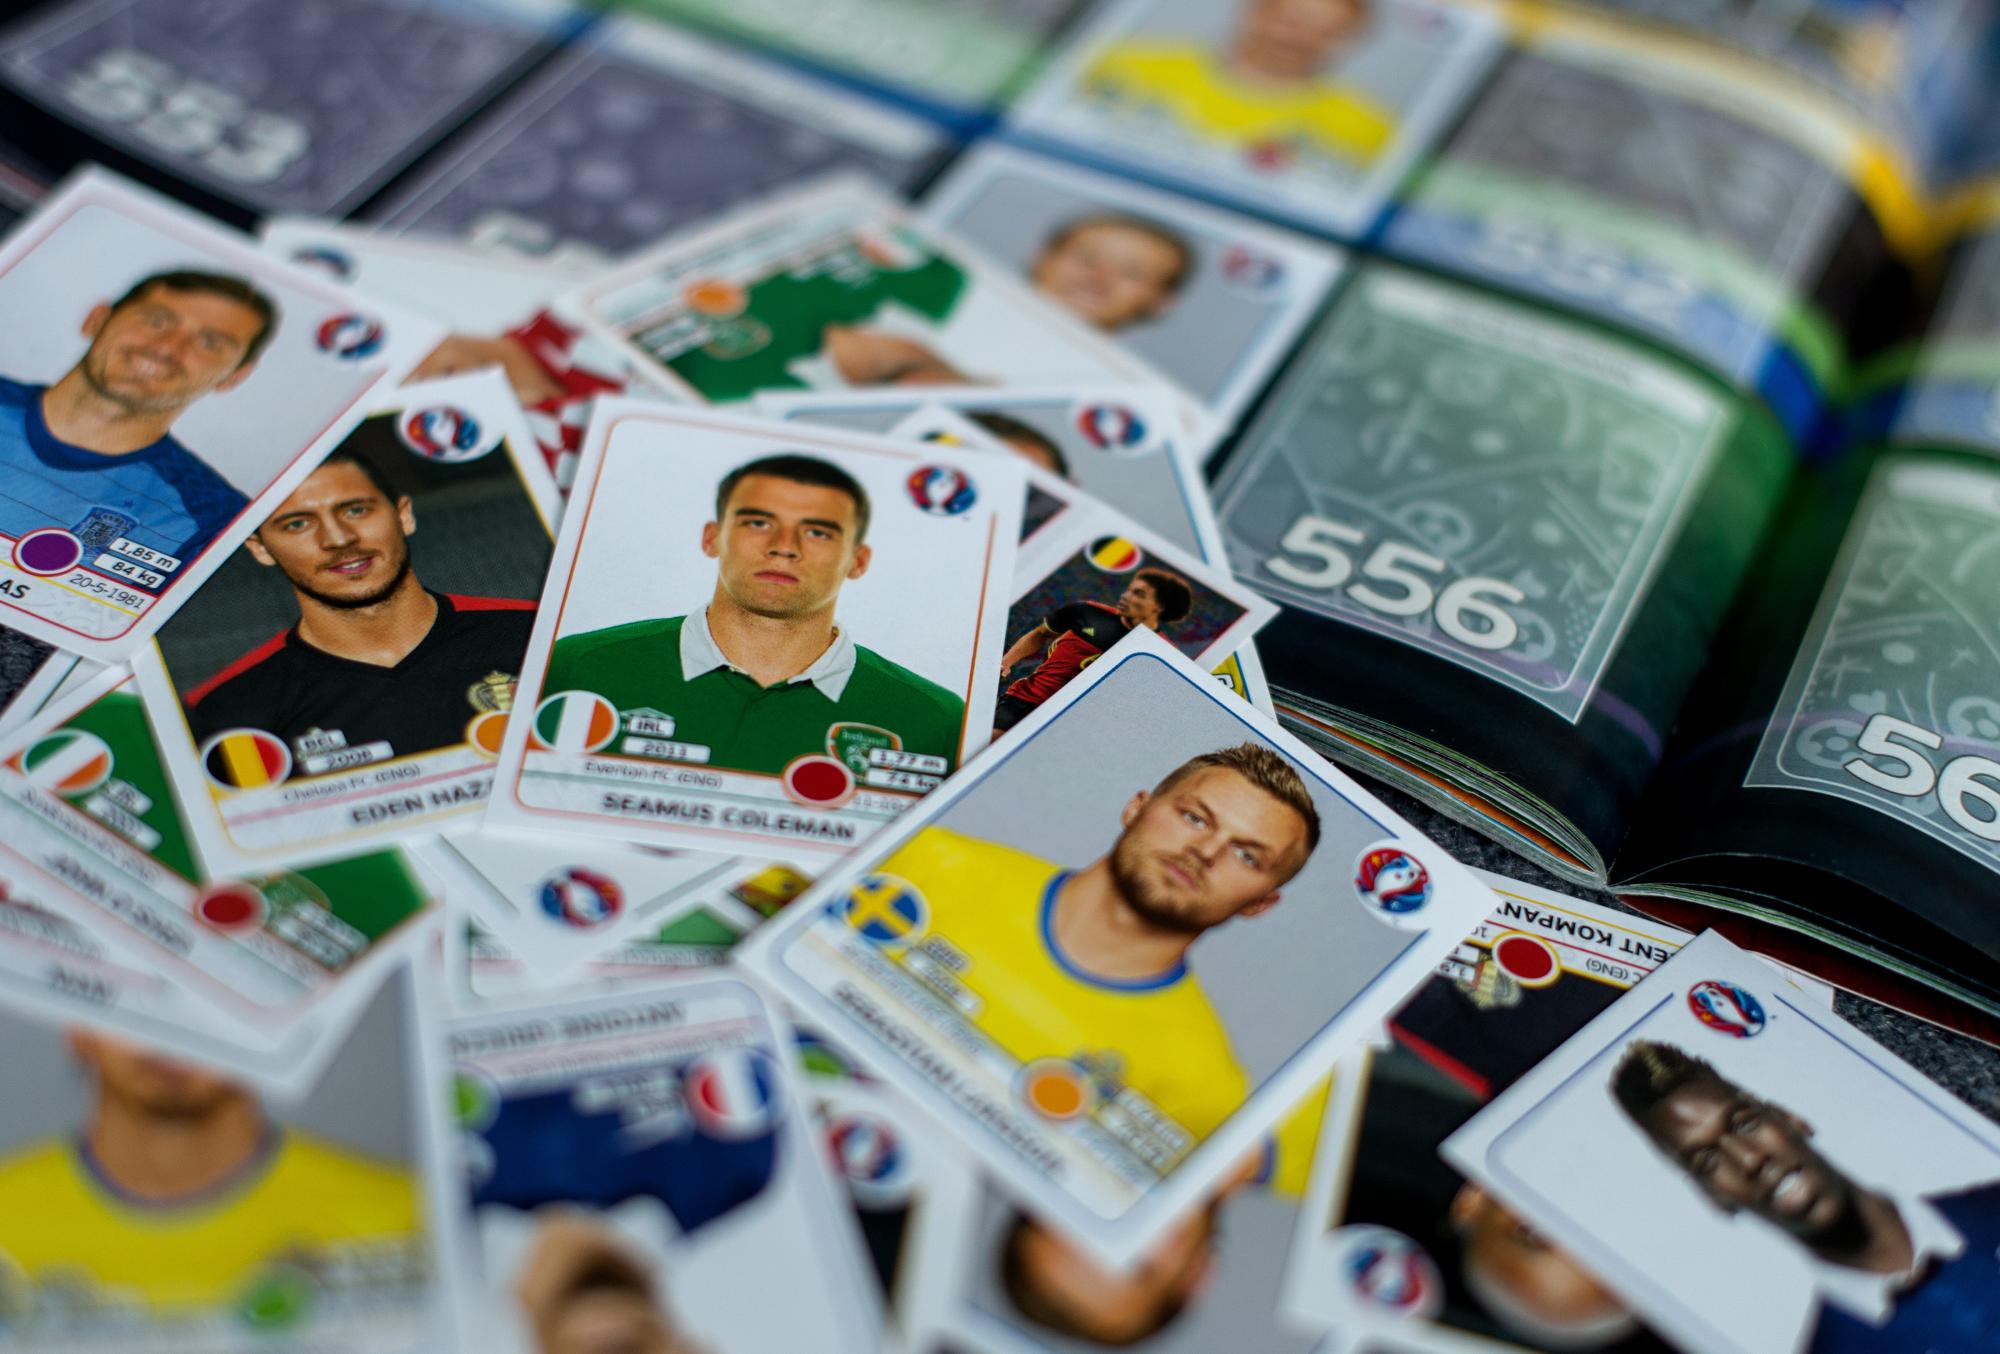 The Panini World Cup 2018 Stickers Are Nearly Here And They'll Cost